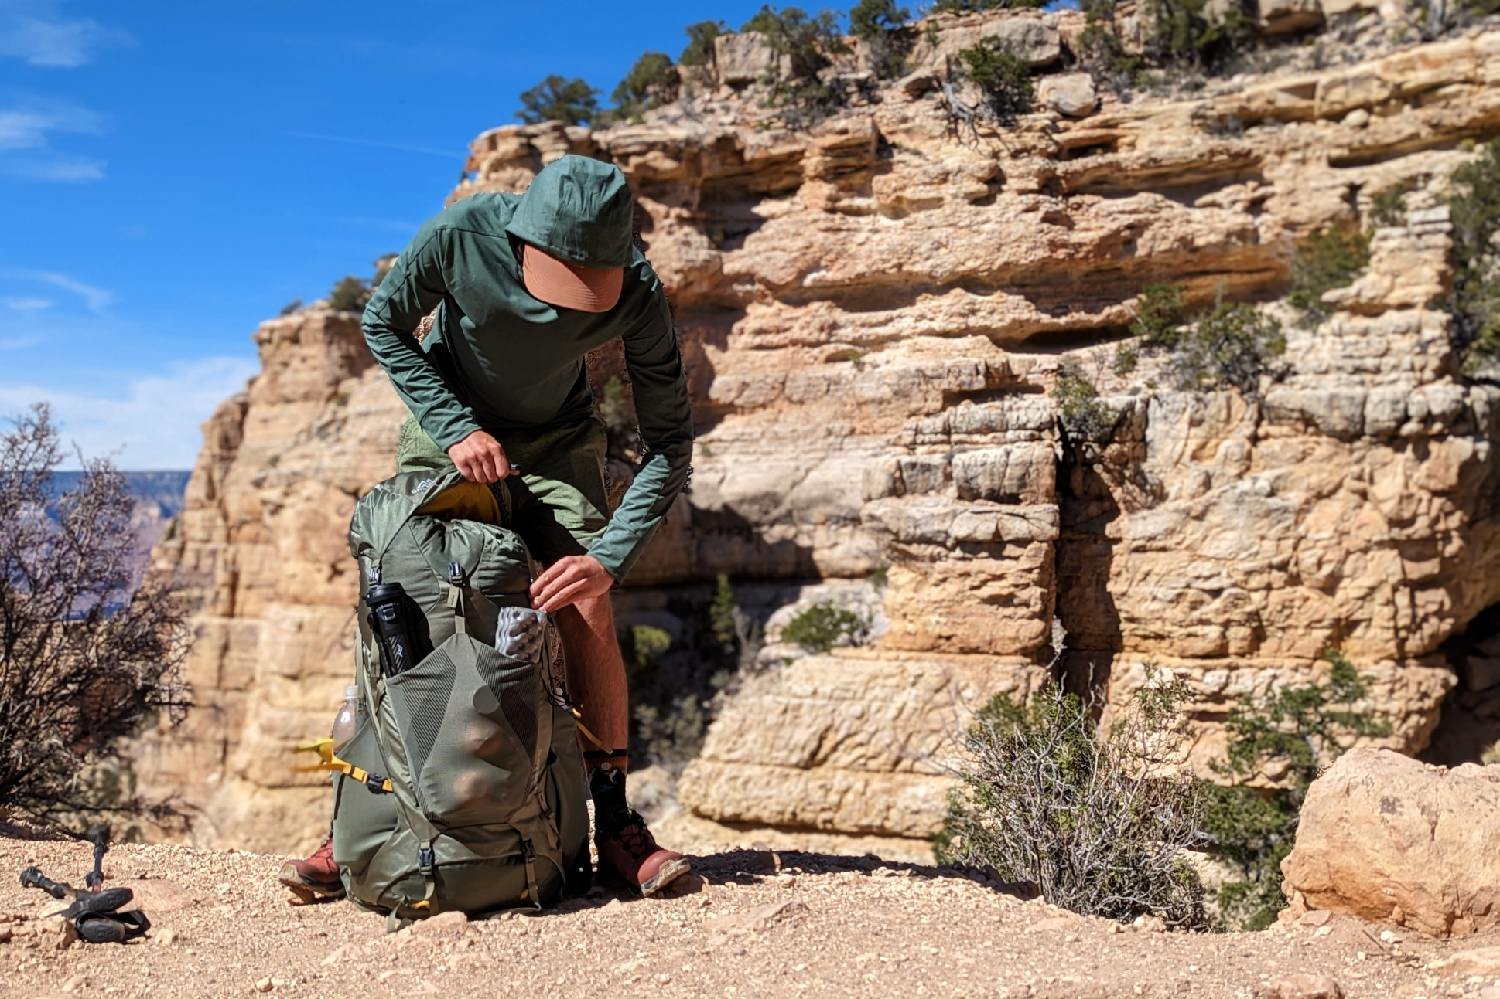 A hiker unclipping the top of lid of the Gregory Paragon 58 backpack with a Grand Canyon view in the background